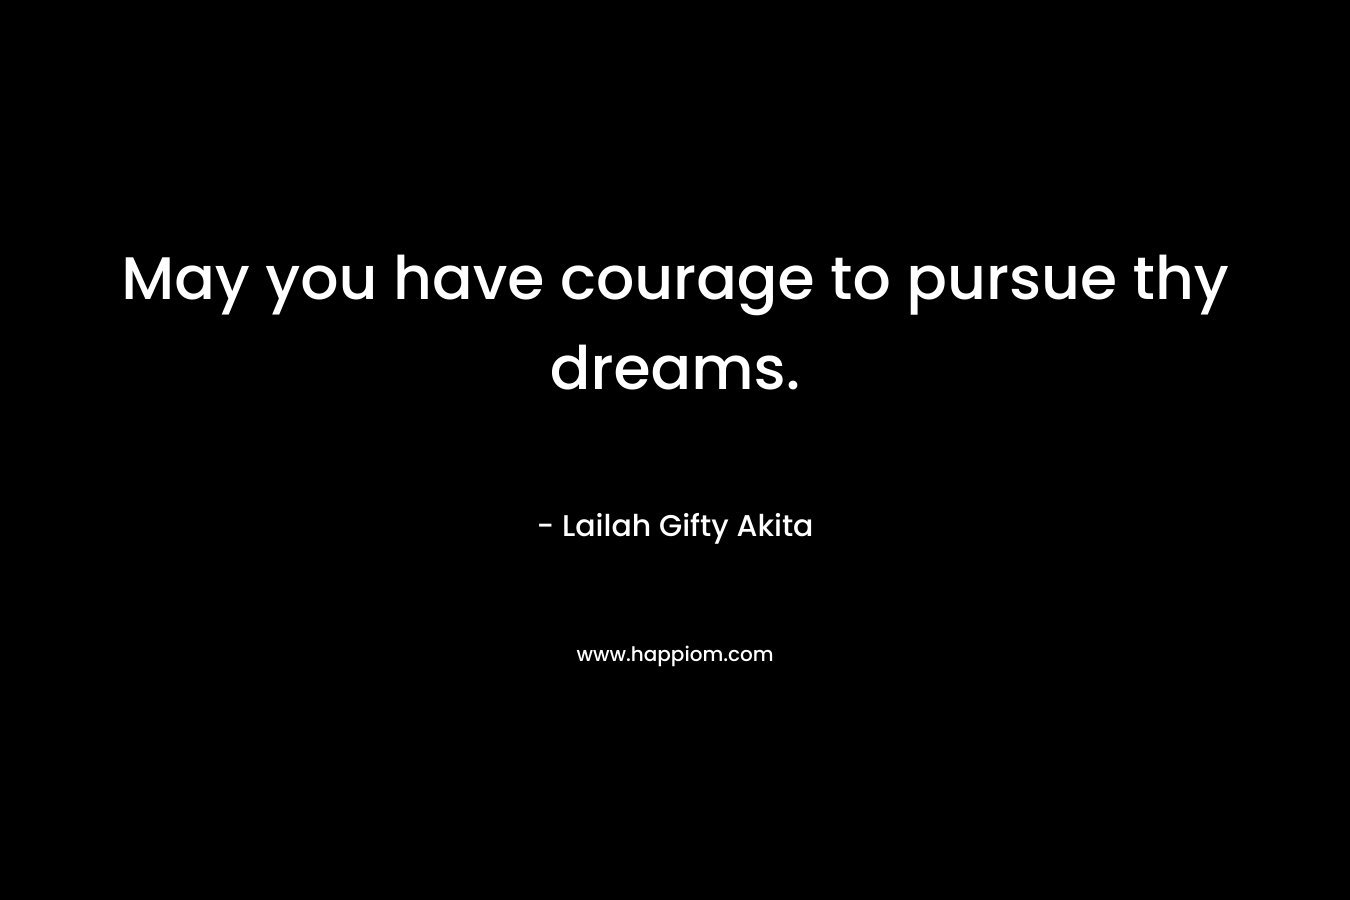 May you have courage to pursue thy dreams.